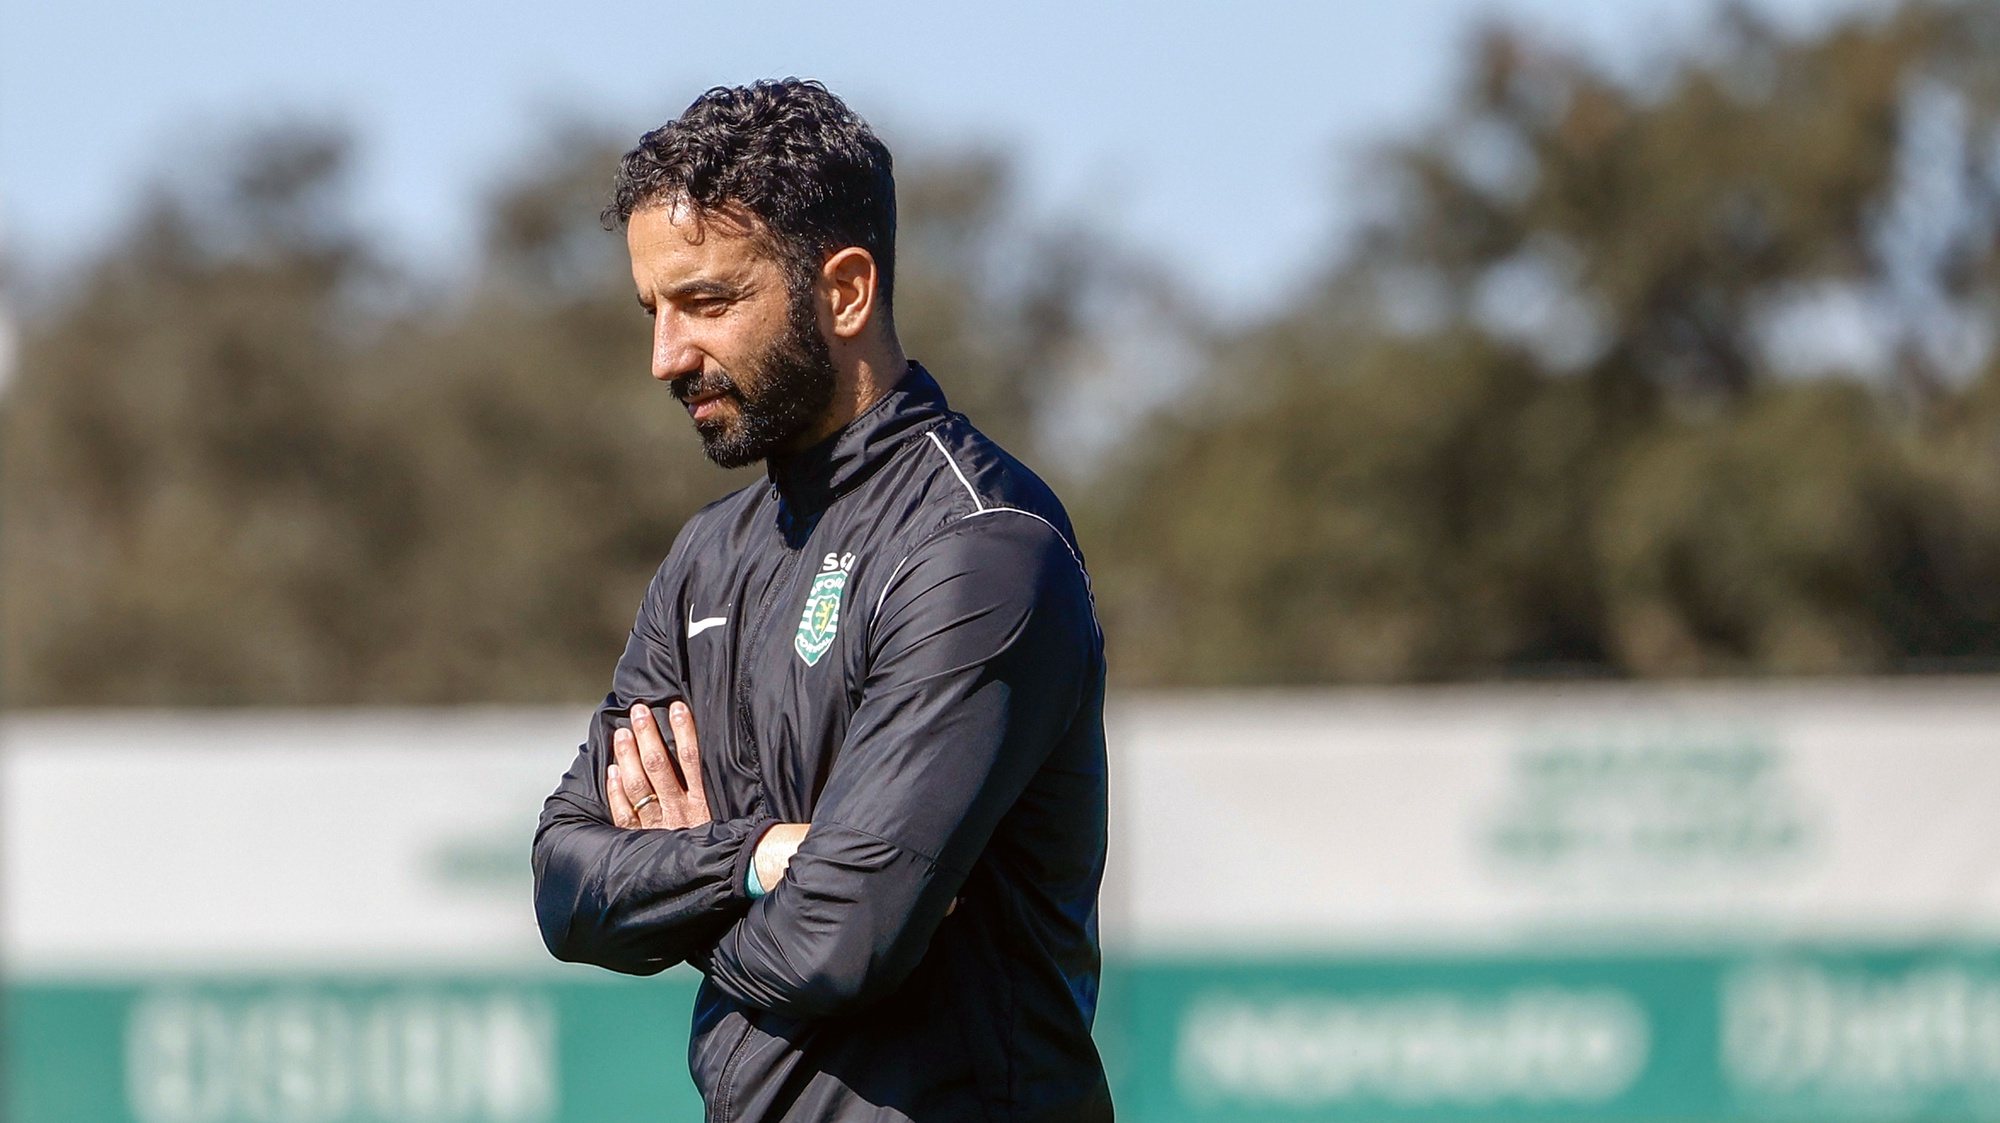 Sporting CP head coach Ruben Amorim leads a training session at Alcochete Academy, in Alcochete, Portugal, 15 March 2023. Sporting CP faces Arsenal in UEFA Europa League the second leg at Emirates stadium in London on 16 March 2023. ANTONIO PEDRO SANTOS/LUSA